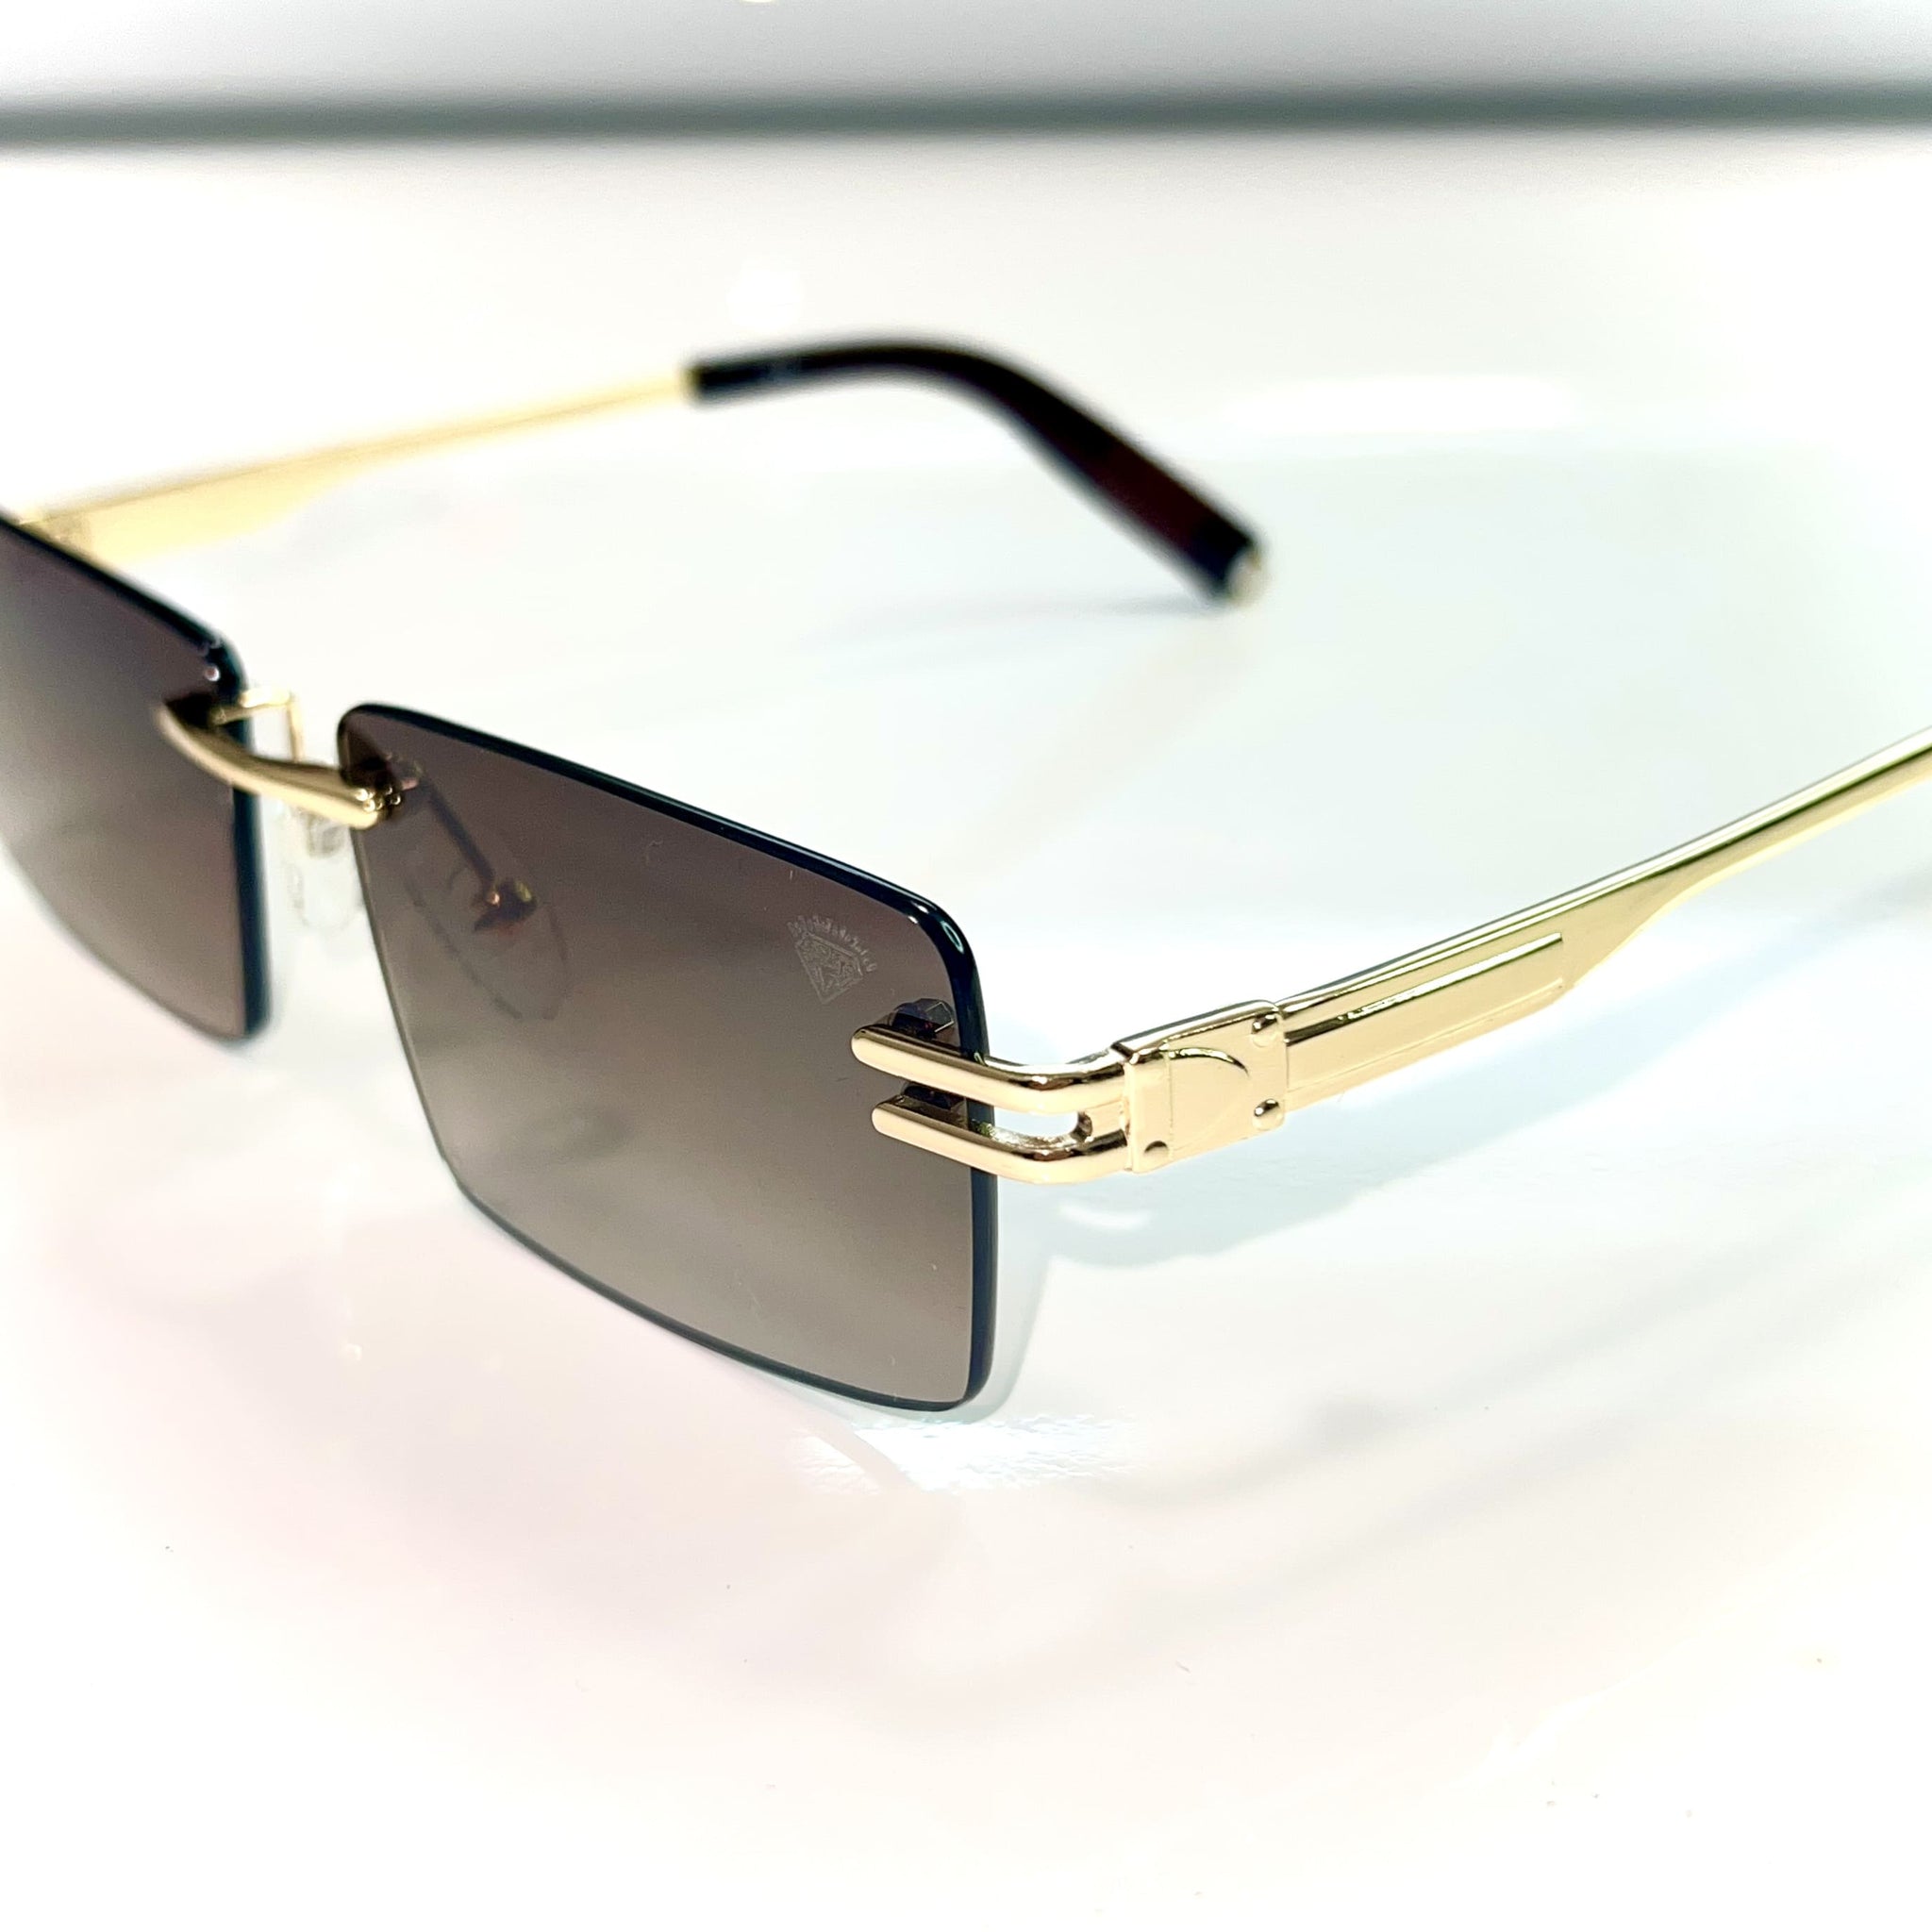 Sehgal Premium Glasses - 14k gold plated - Brown Shade - Gold frame